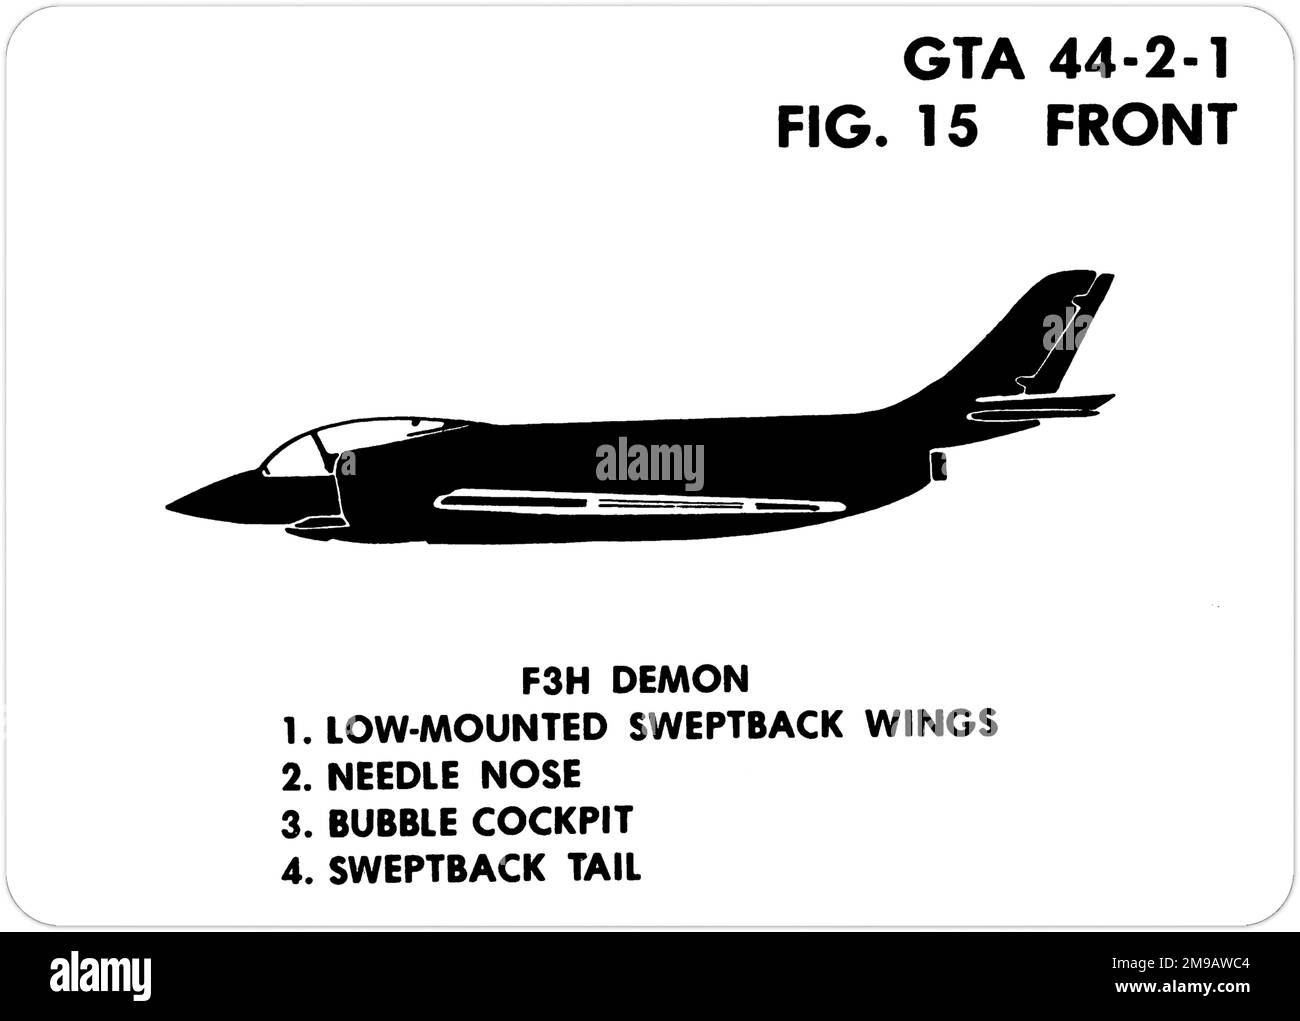 McDonnell F3H-2 Demon. This is one of the series of Graphics Training Aids (GTA) used by the United States Army to train their personnel to recognize friendly and hostile aircraft. This particular set, GTA 44-2-1, was issued in July1977. The set features aircraft from: Canada, Italy, United Kingdom, United States, and the USSR. Stock Photo